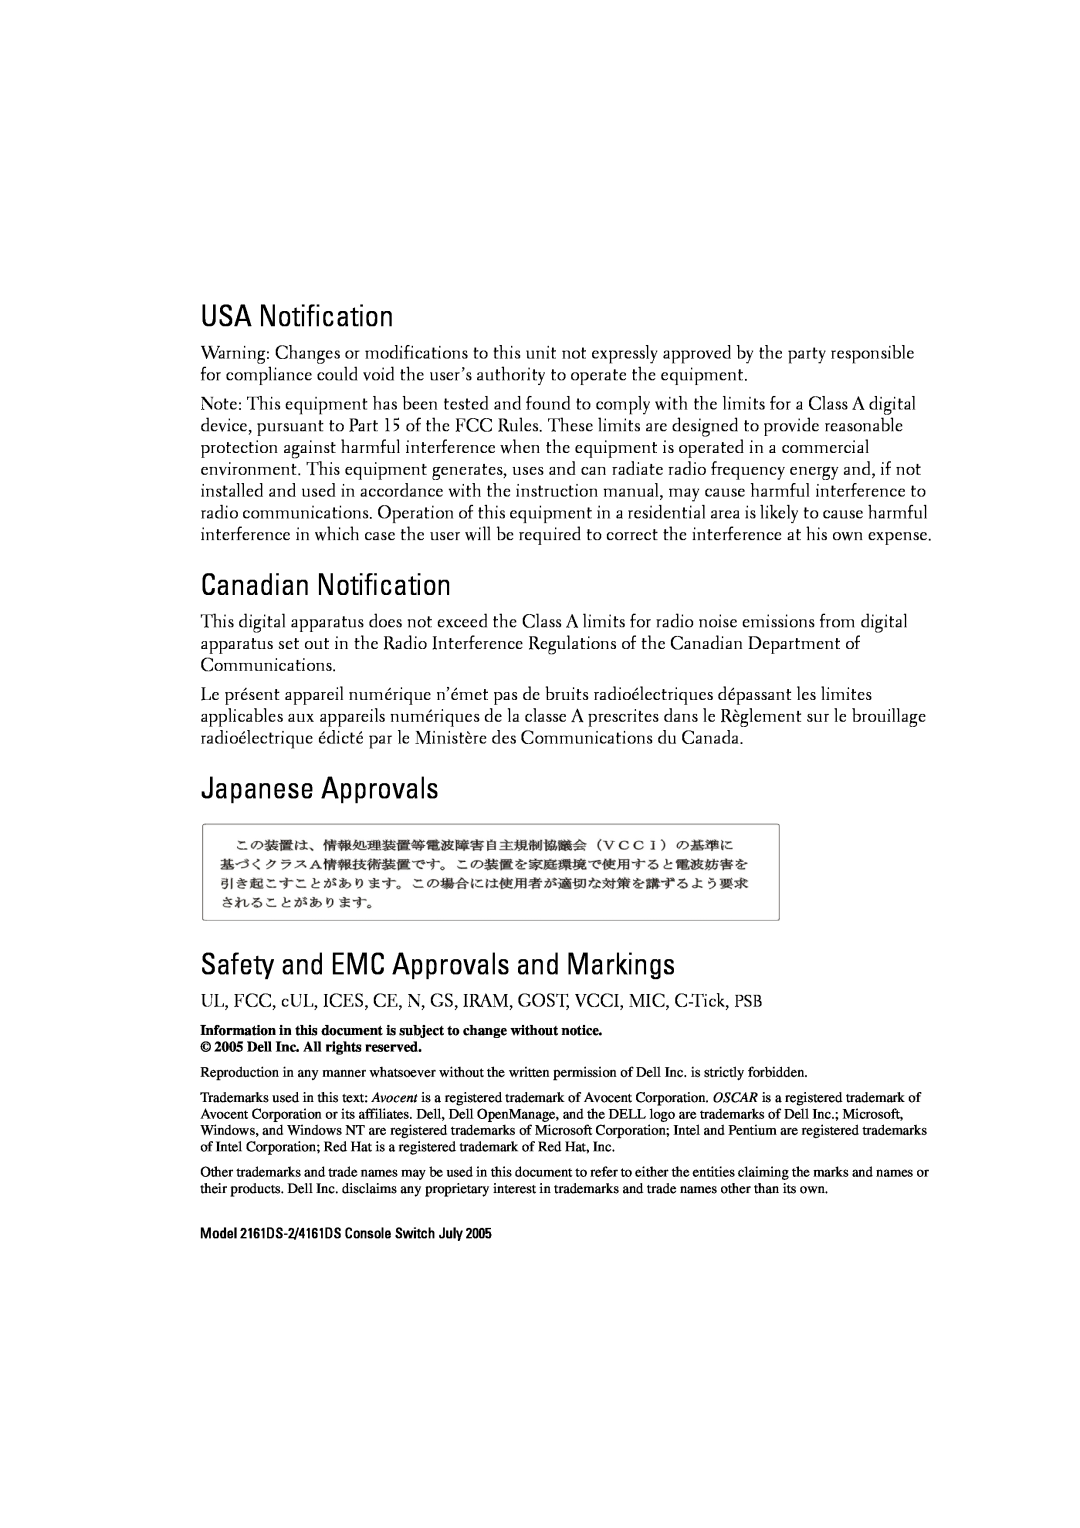 Dell 4161DS, 2161DS-2 USA Notification, Canadian Notification, Japanese Approvals Safety and EMC Approvals and Markings 